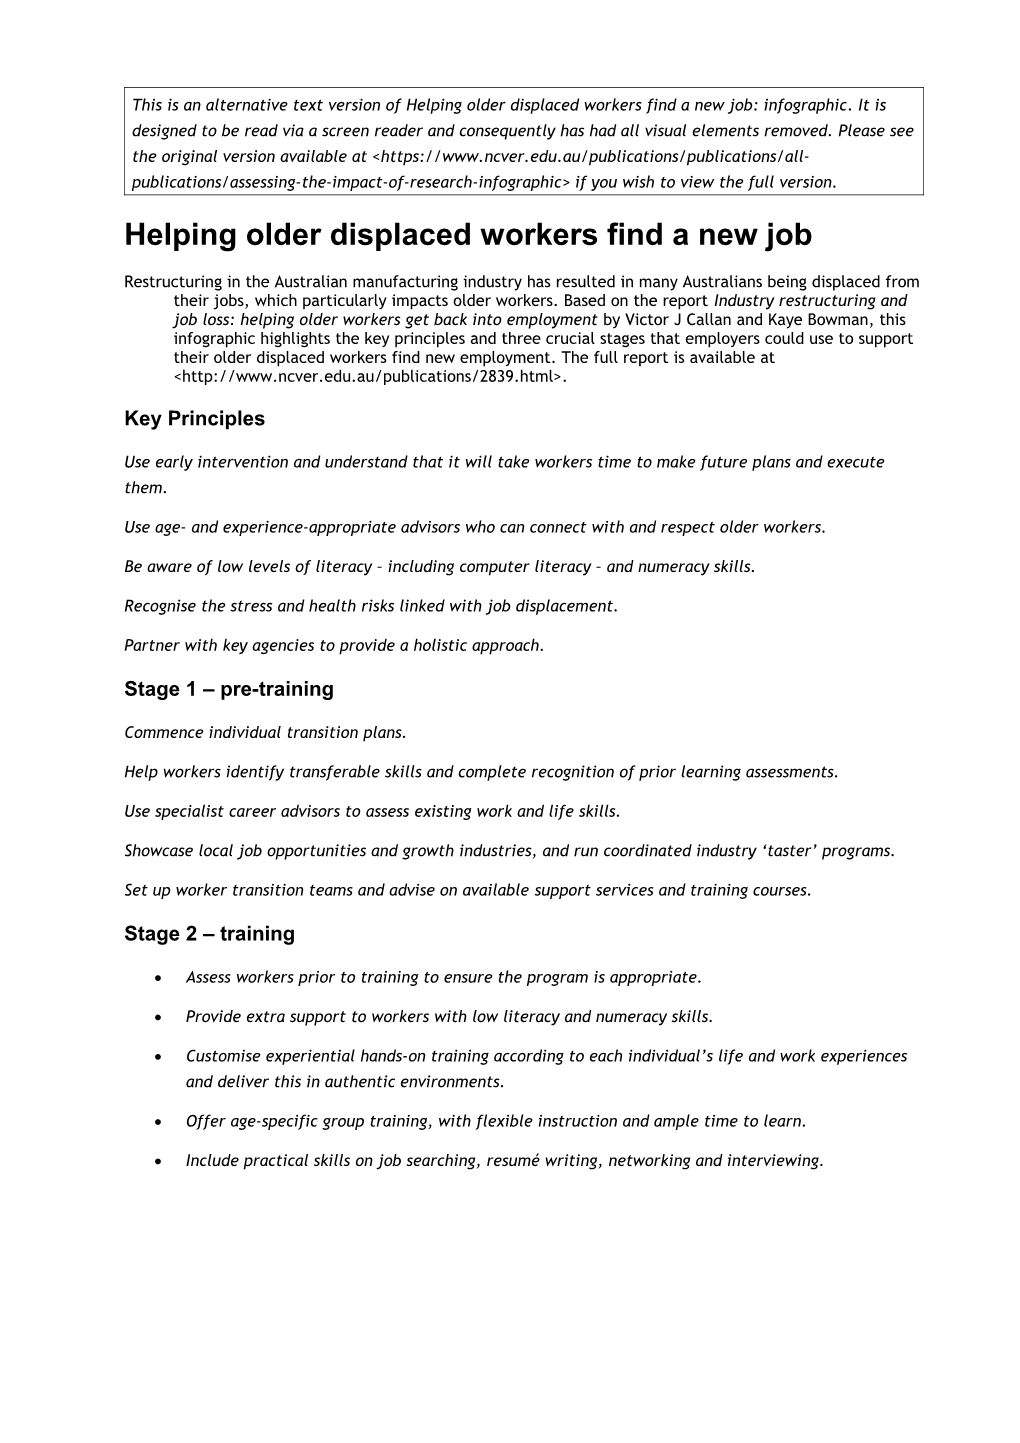 Helping Older Displaced Workers Find a New Job